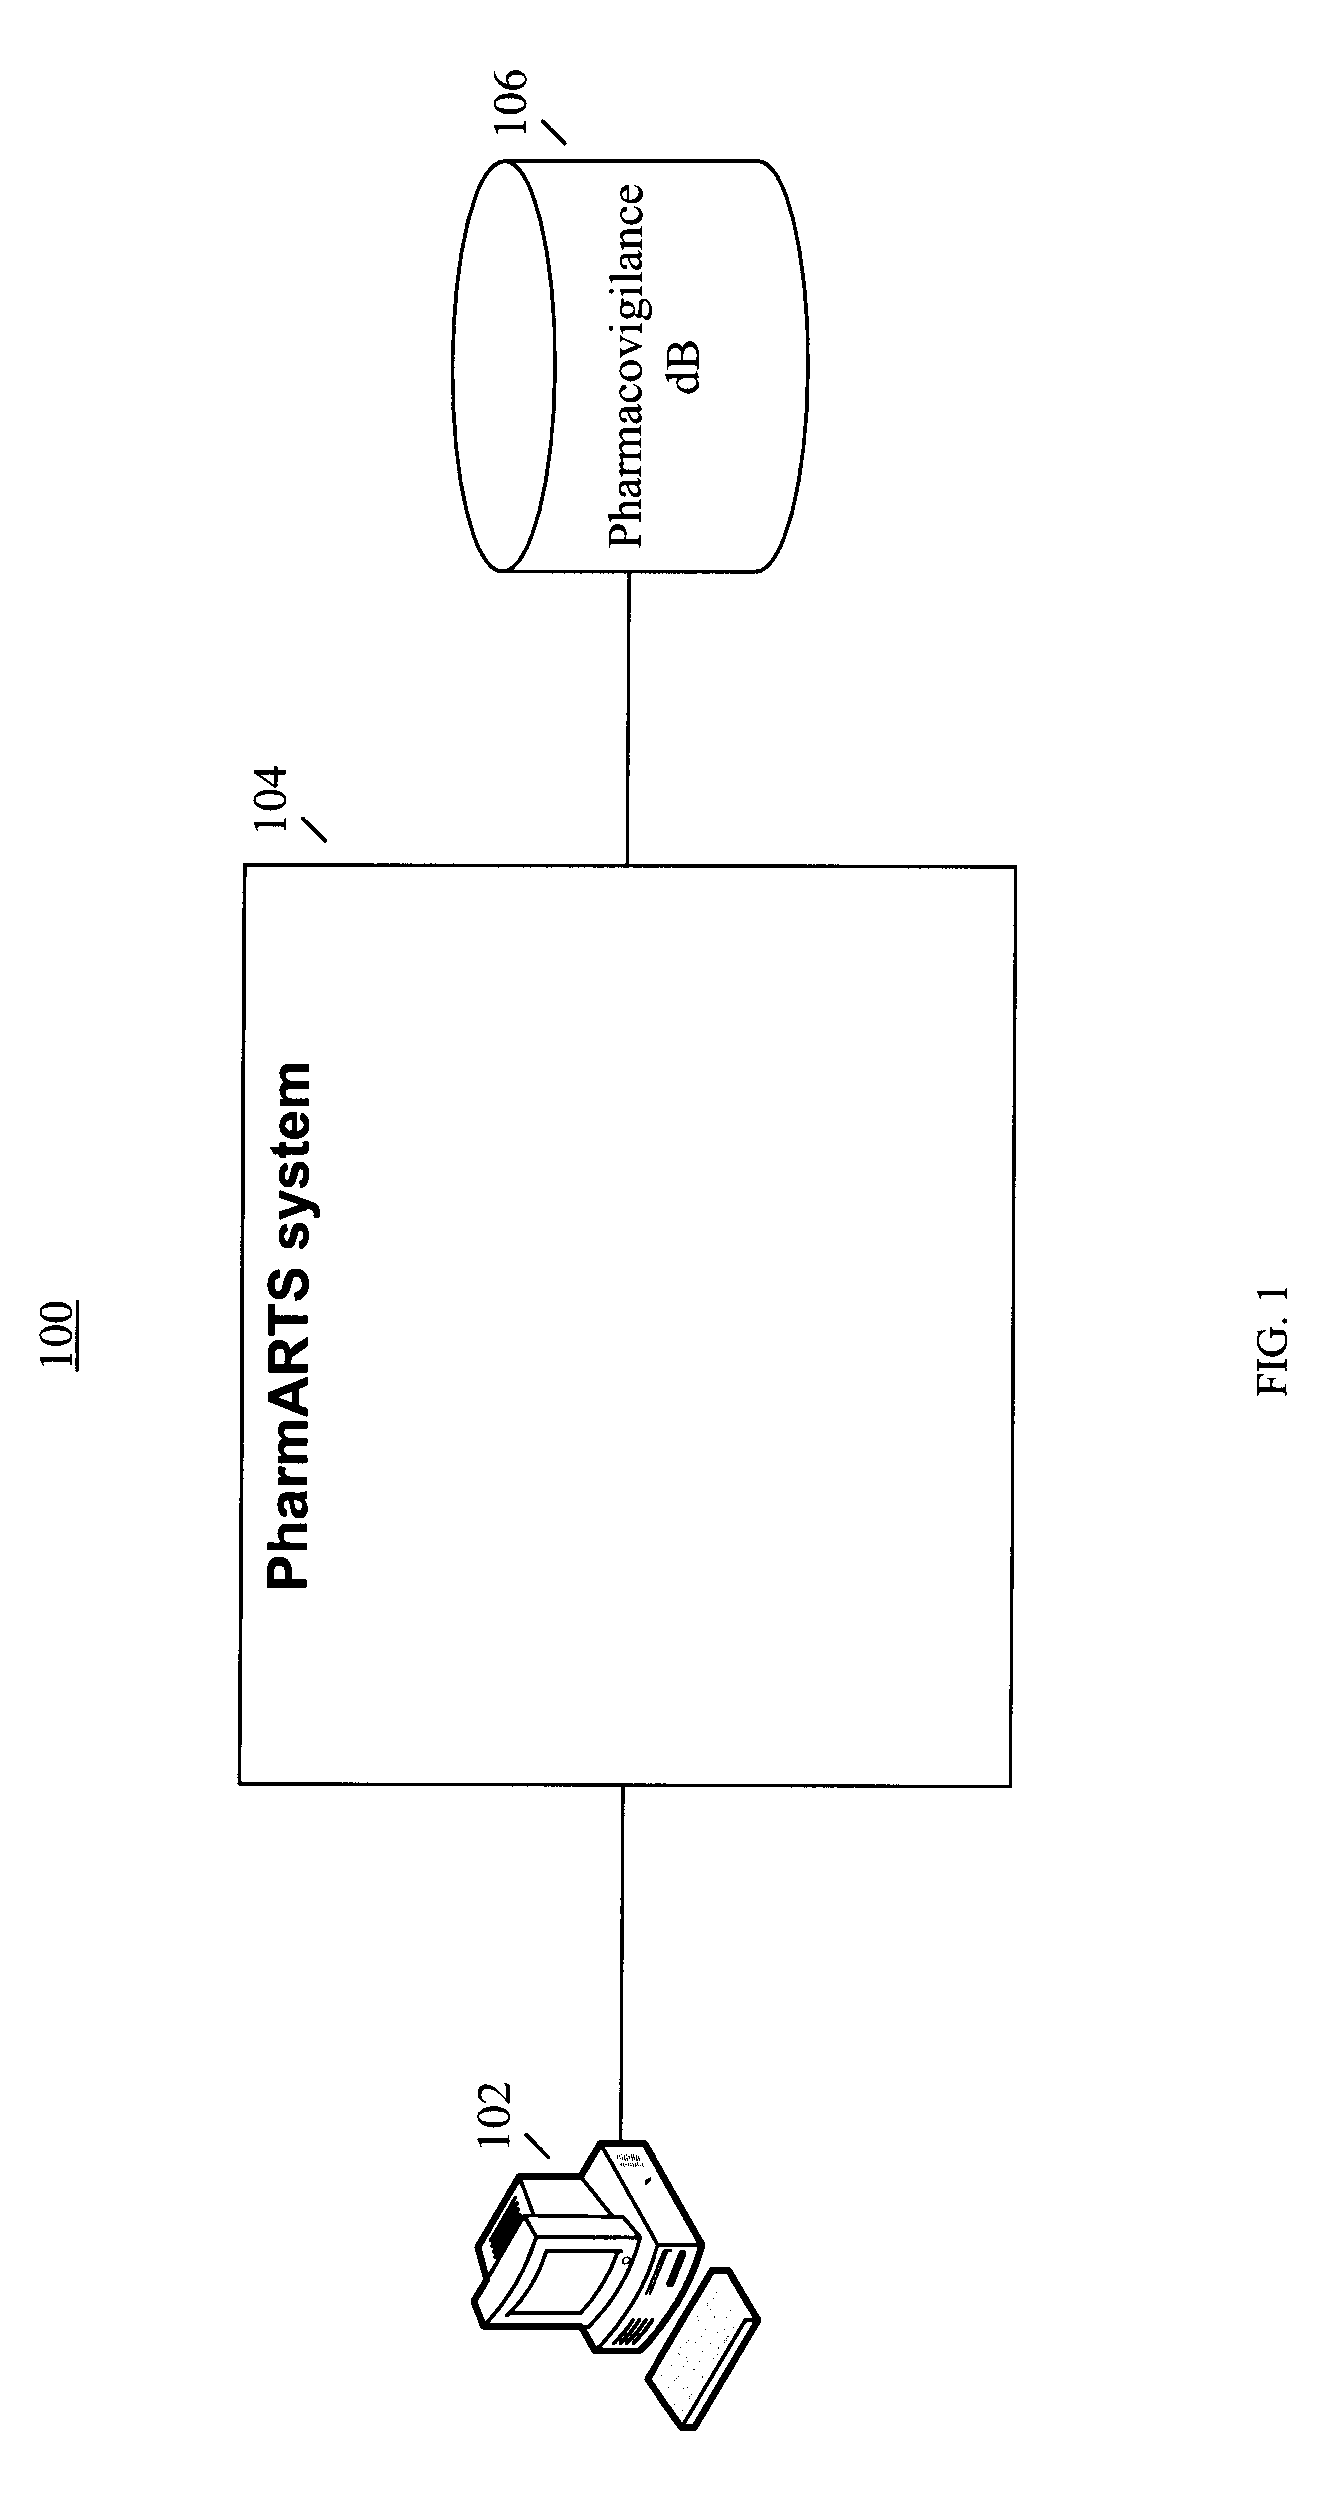 Systems and methods for providing improved access to phamacovigilance data